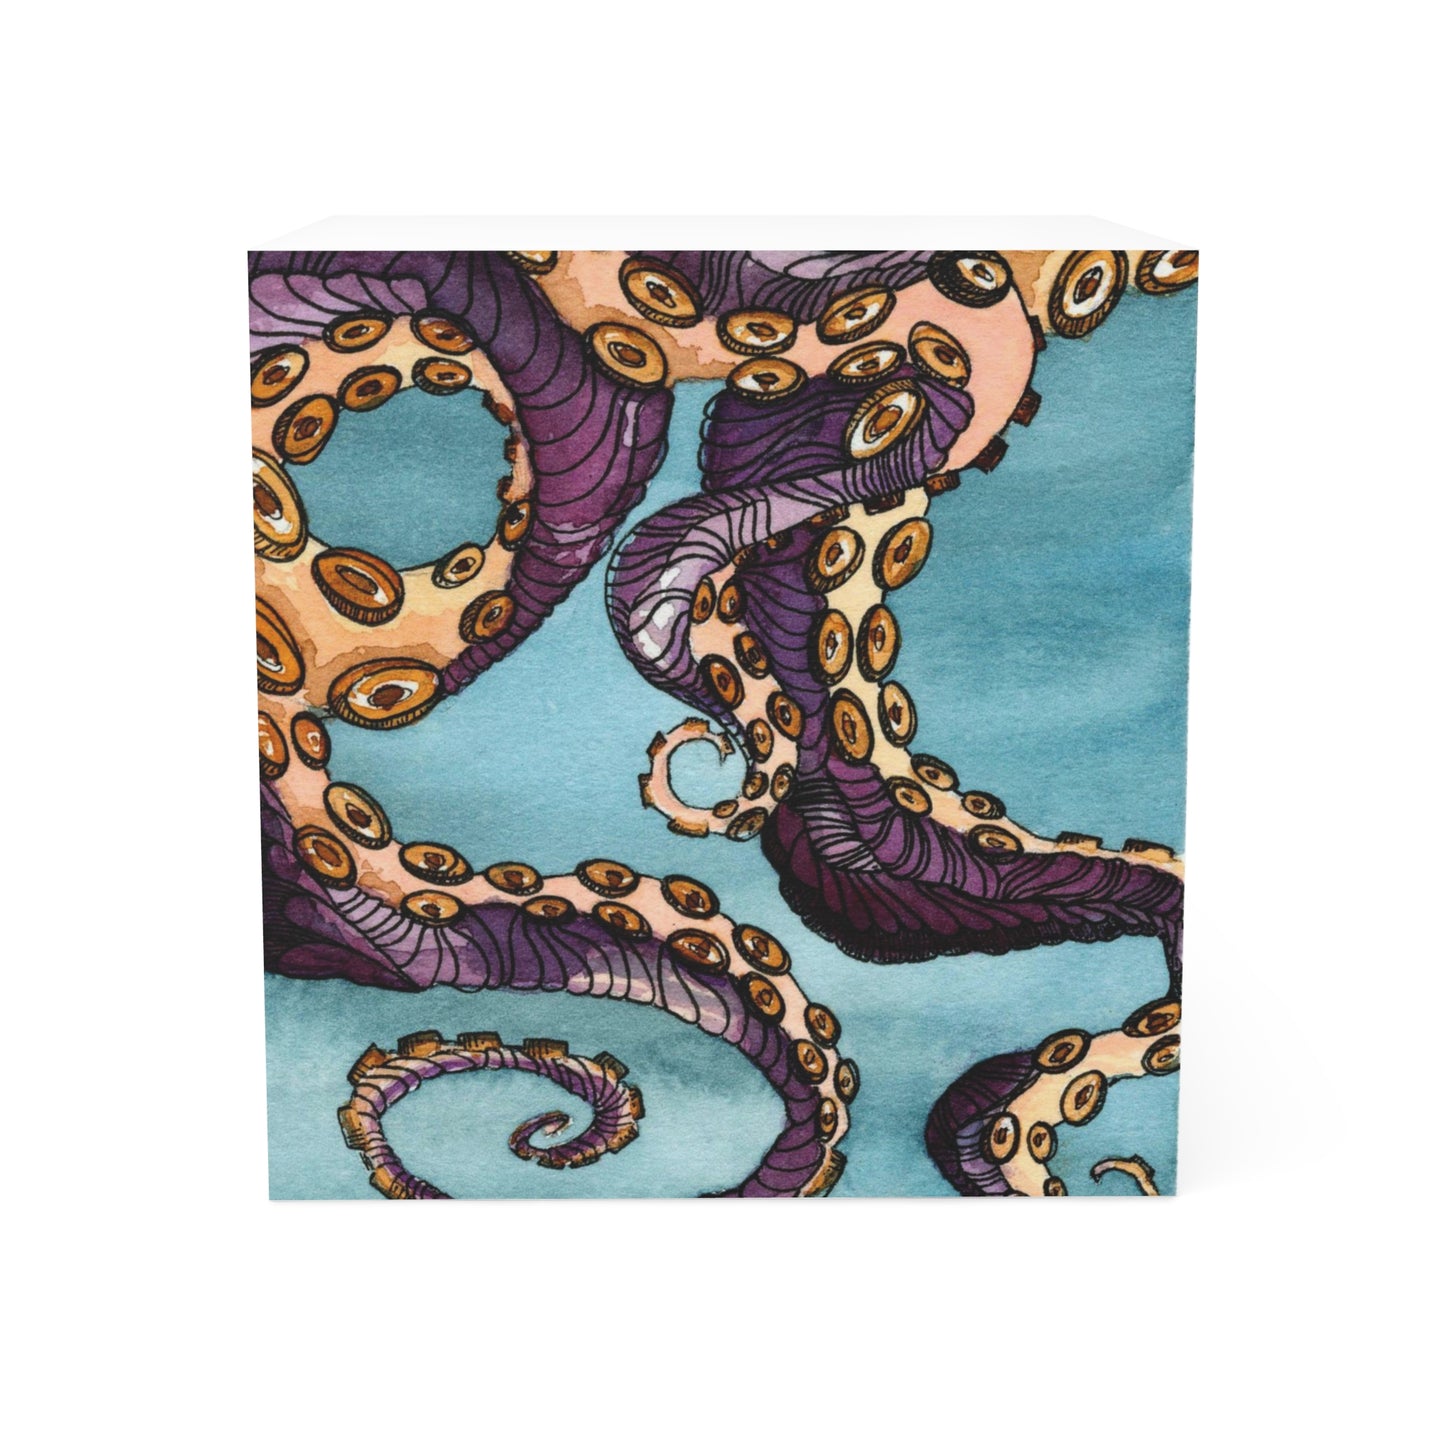 Tentacle Note Cube